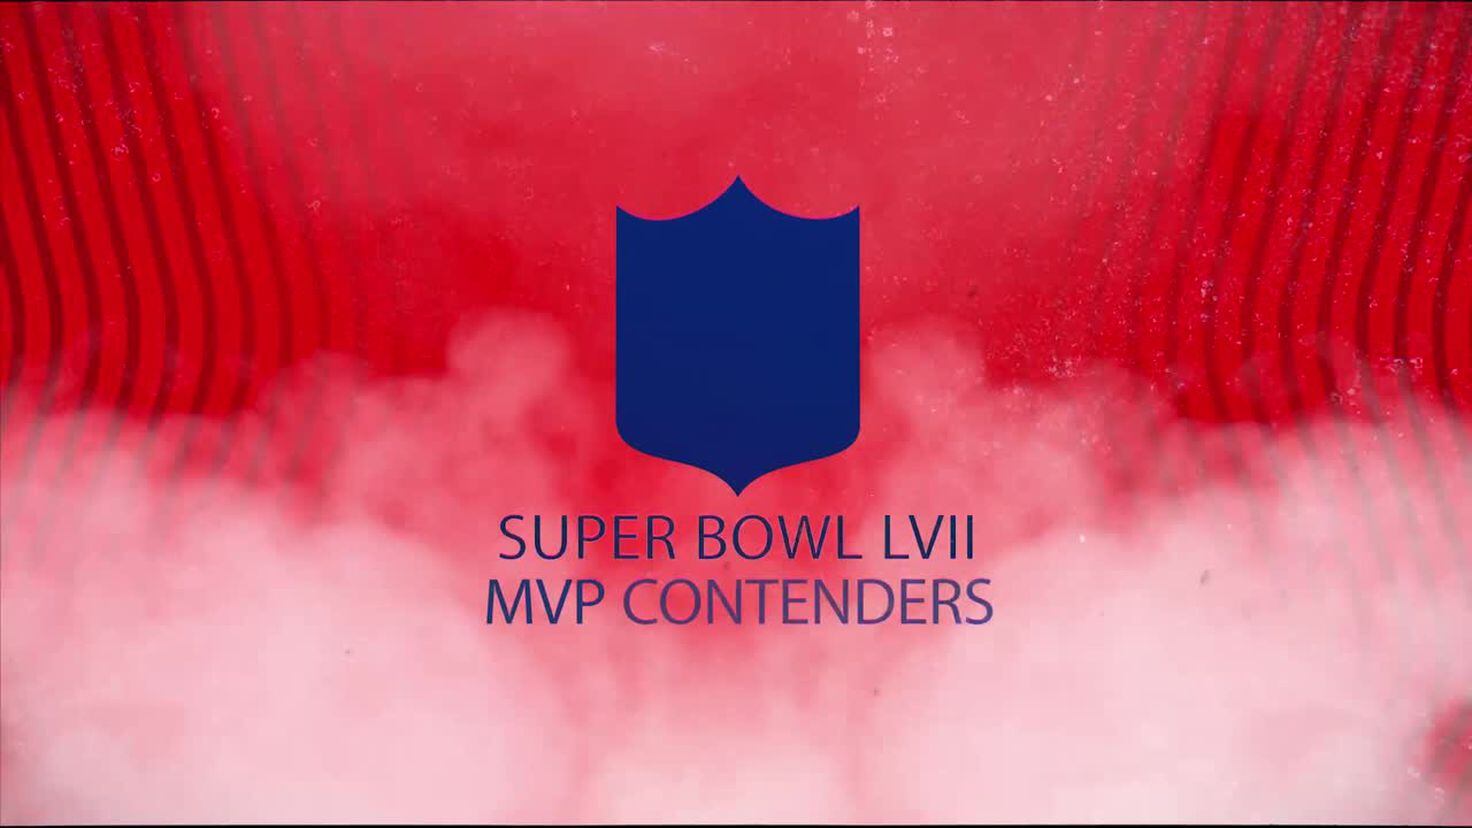 Super Bowl LVII features the top two MVP vote-getters in Patrick Mahomes  and Jalen Hurts